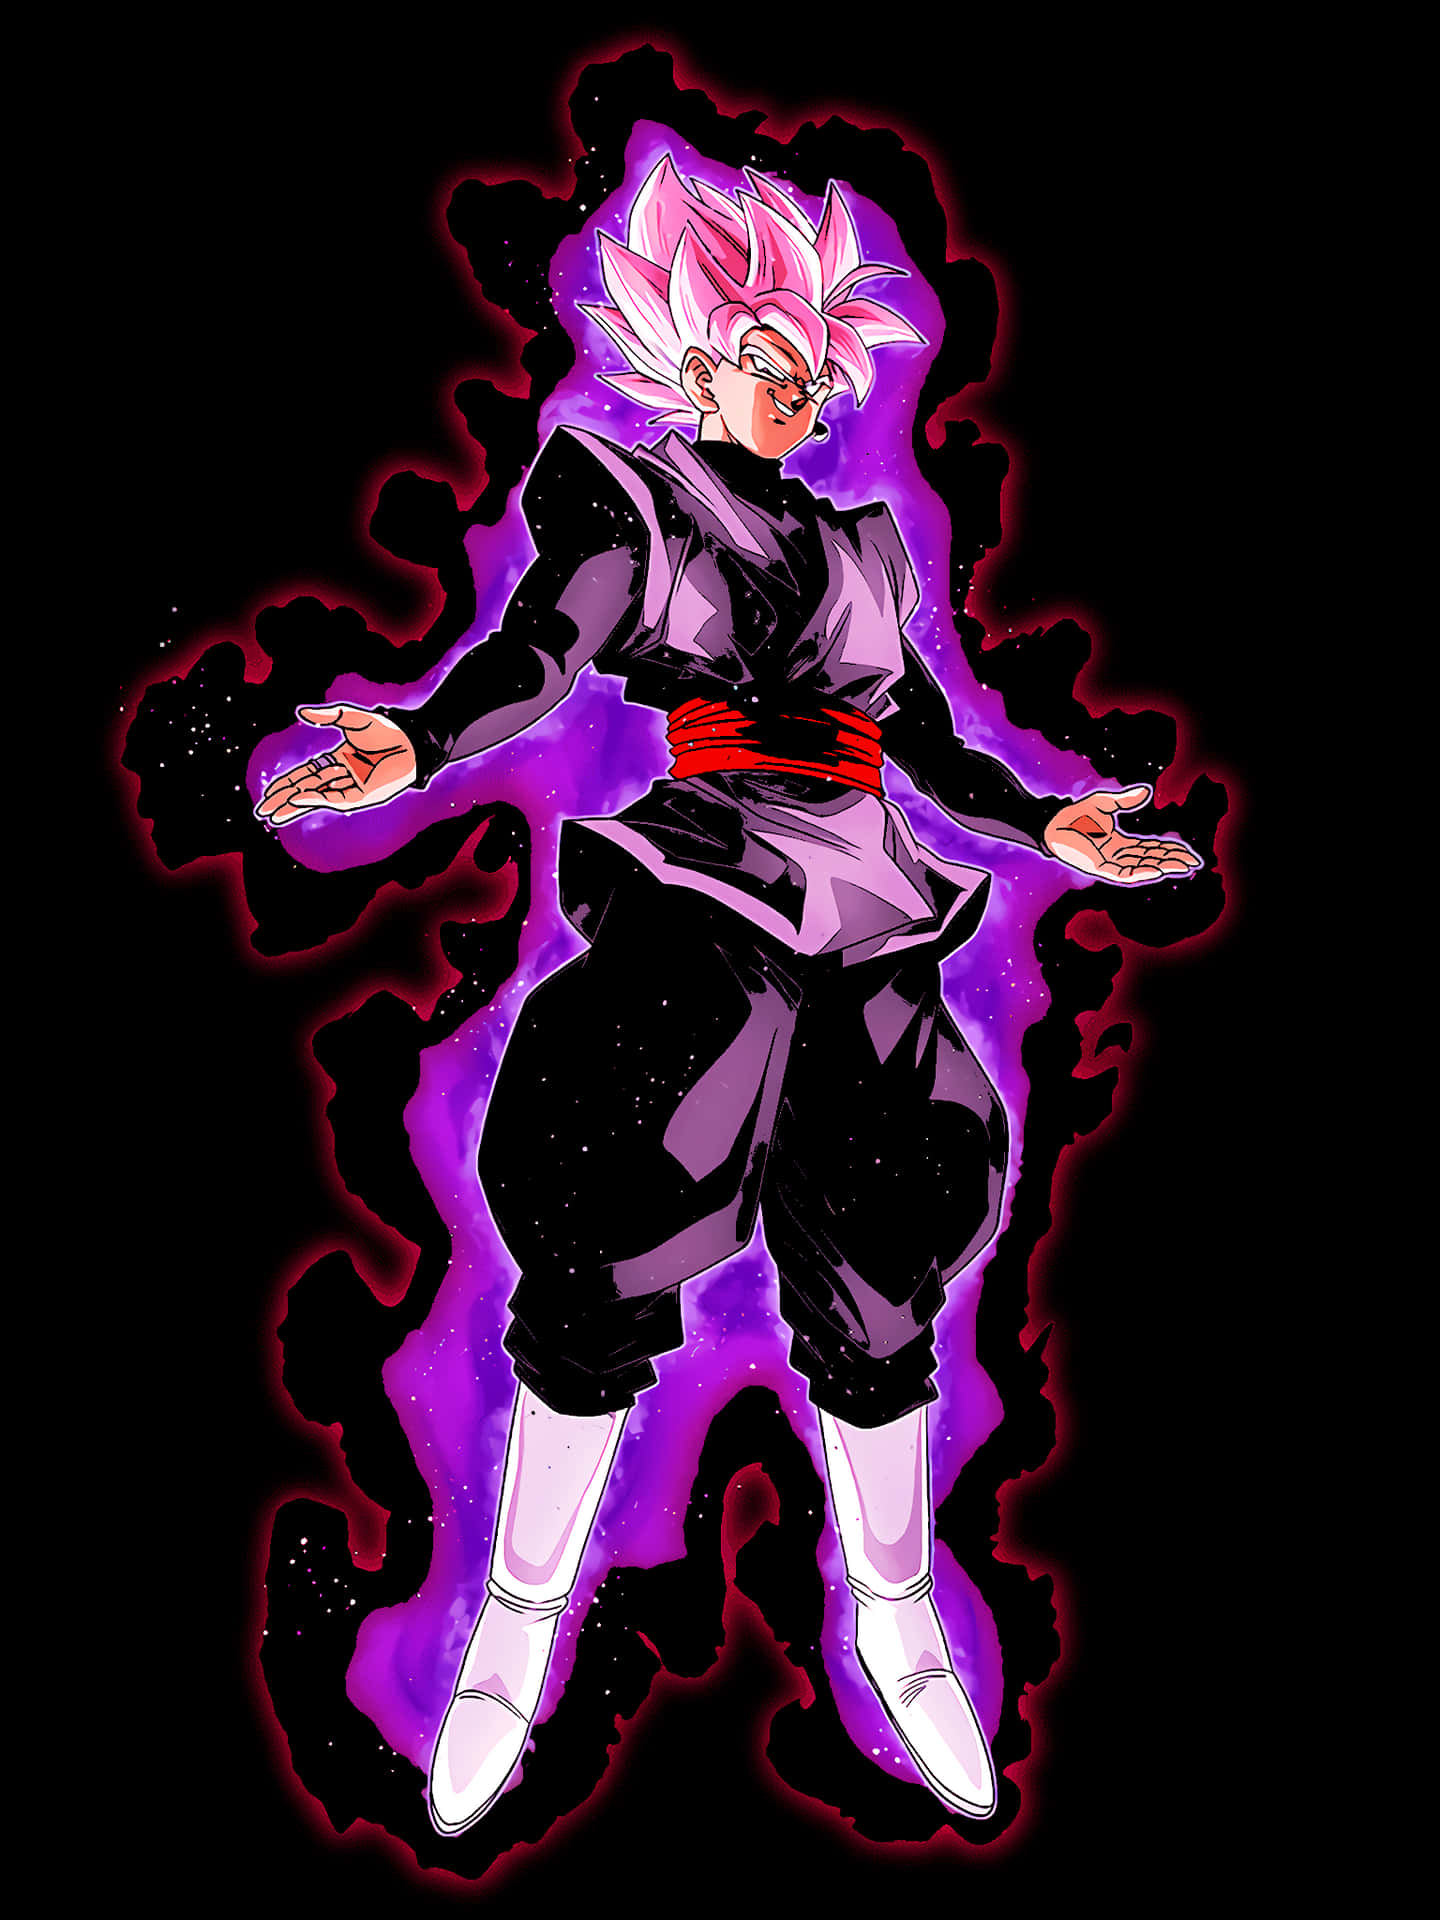 The powerful and mysterious "Goku Black" of Dragon Ball Super!